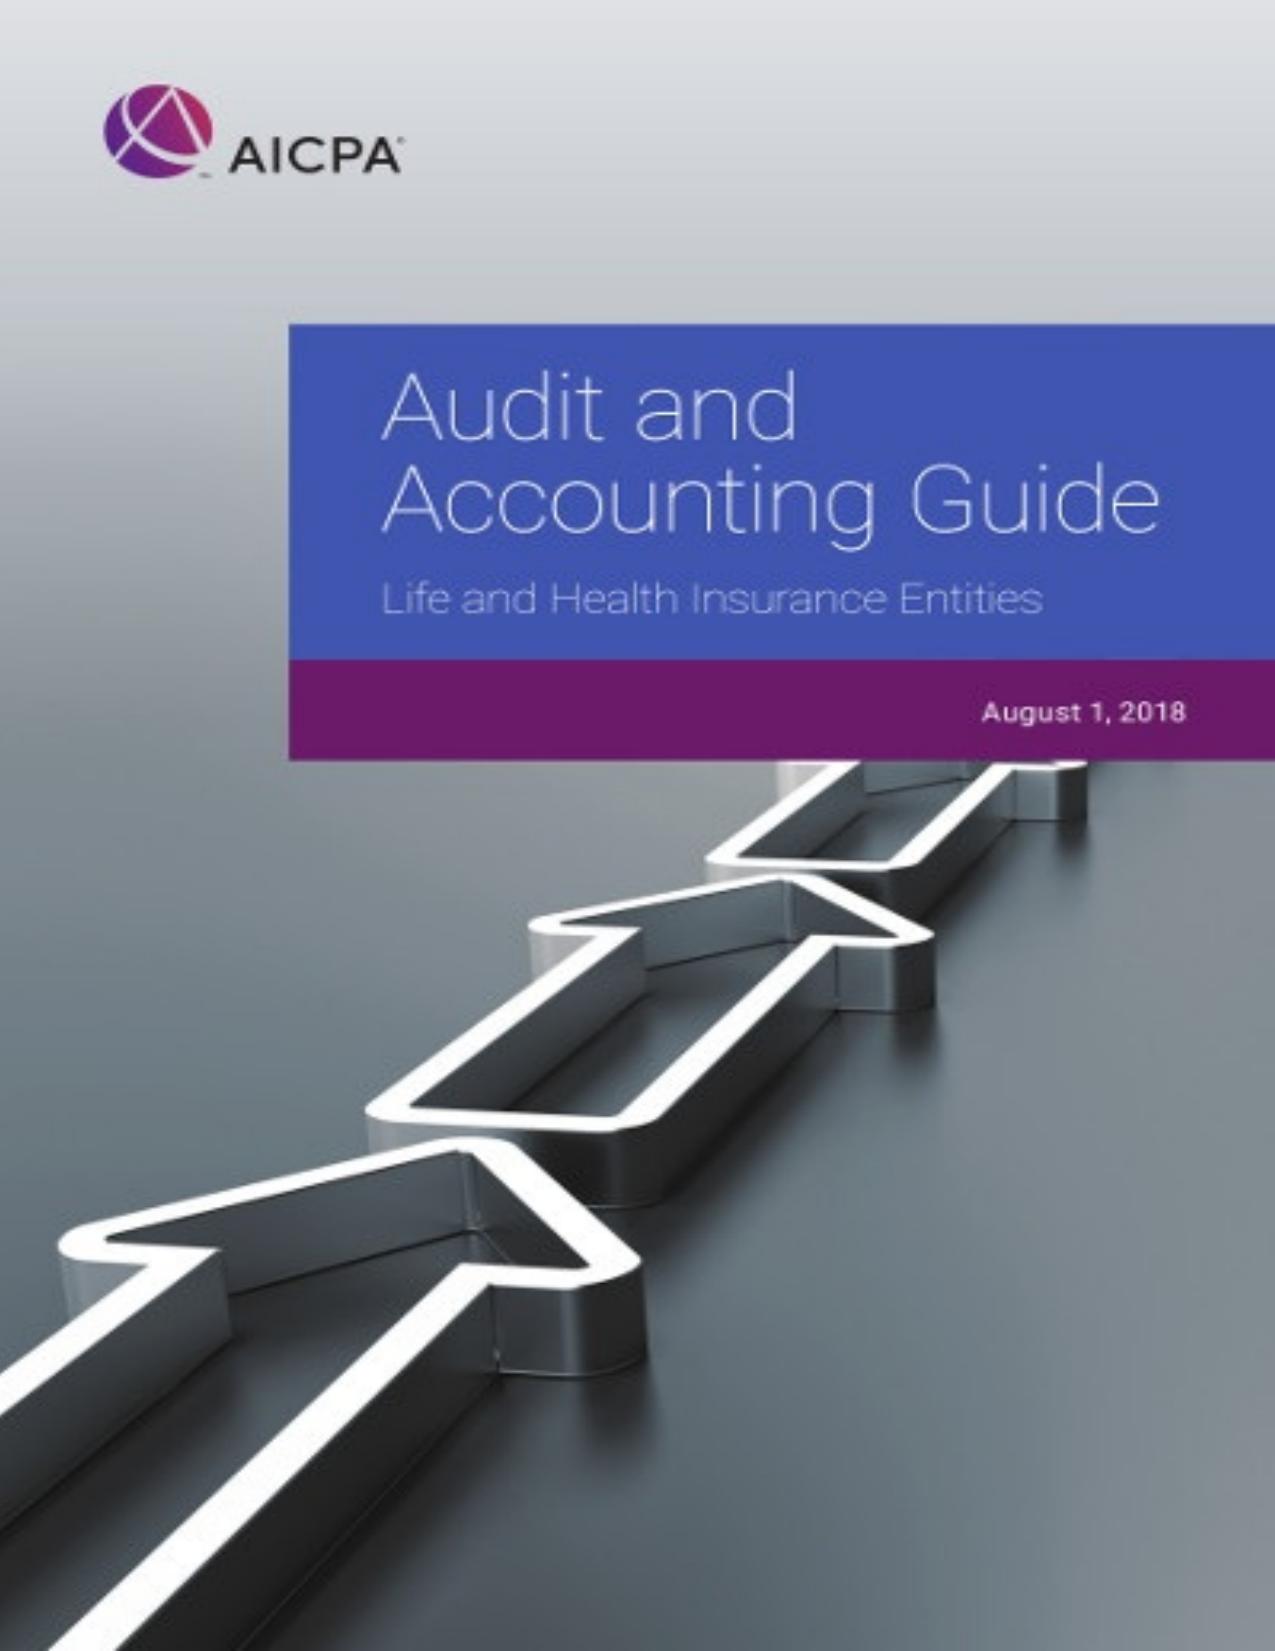 Audit and Accounting Guide: Life and Health Insurance Entities 2018 \(AICPA Audit and Accounting Guide\) - PDFDrive.com